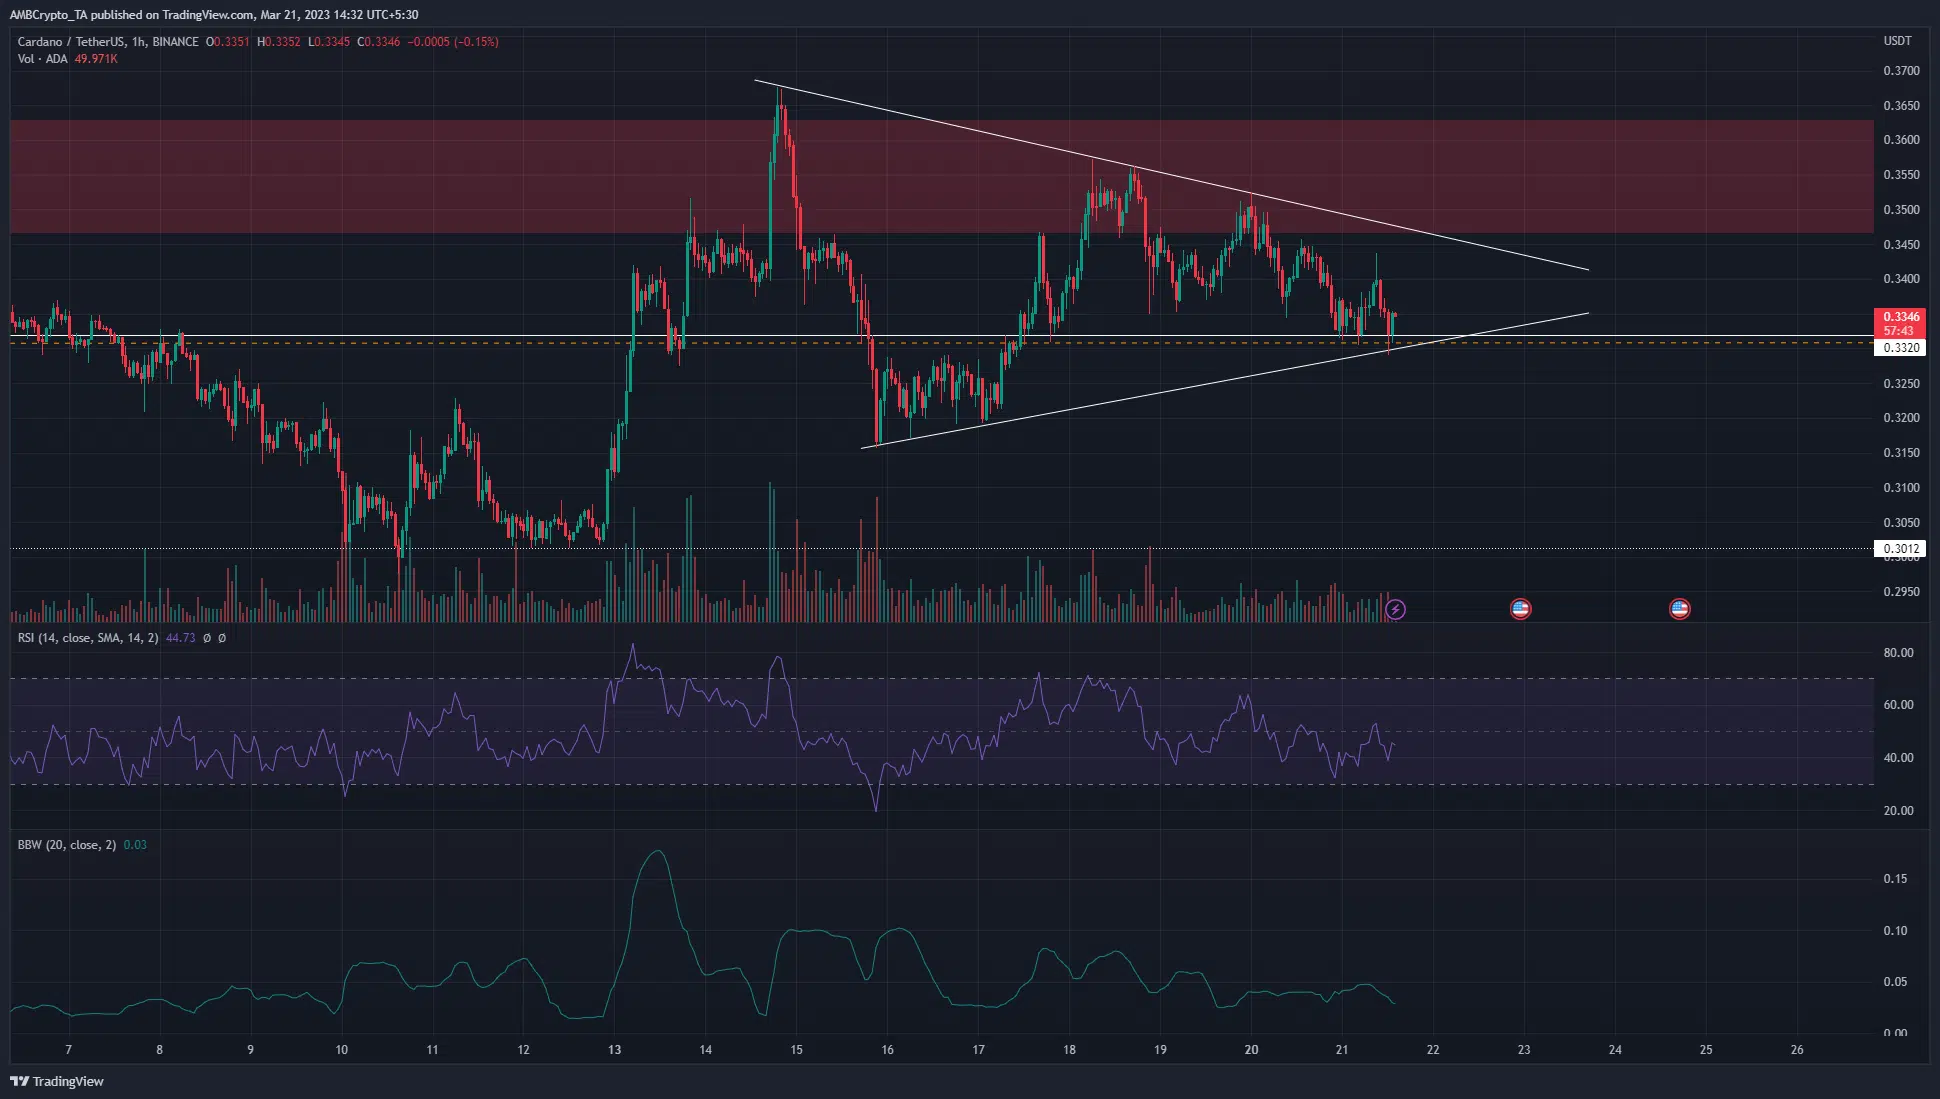 Cardano shows a likelihood of a downward breakout after a compression